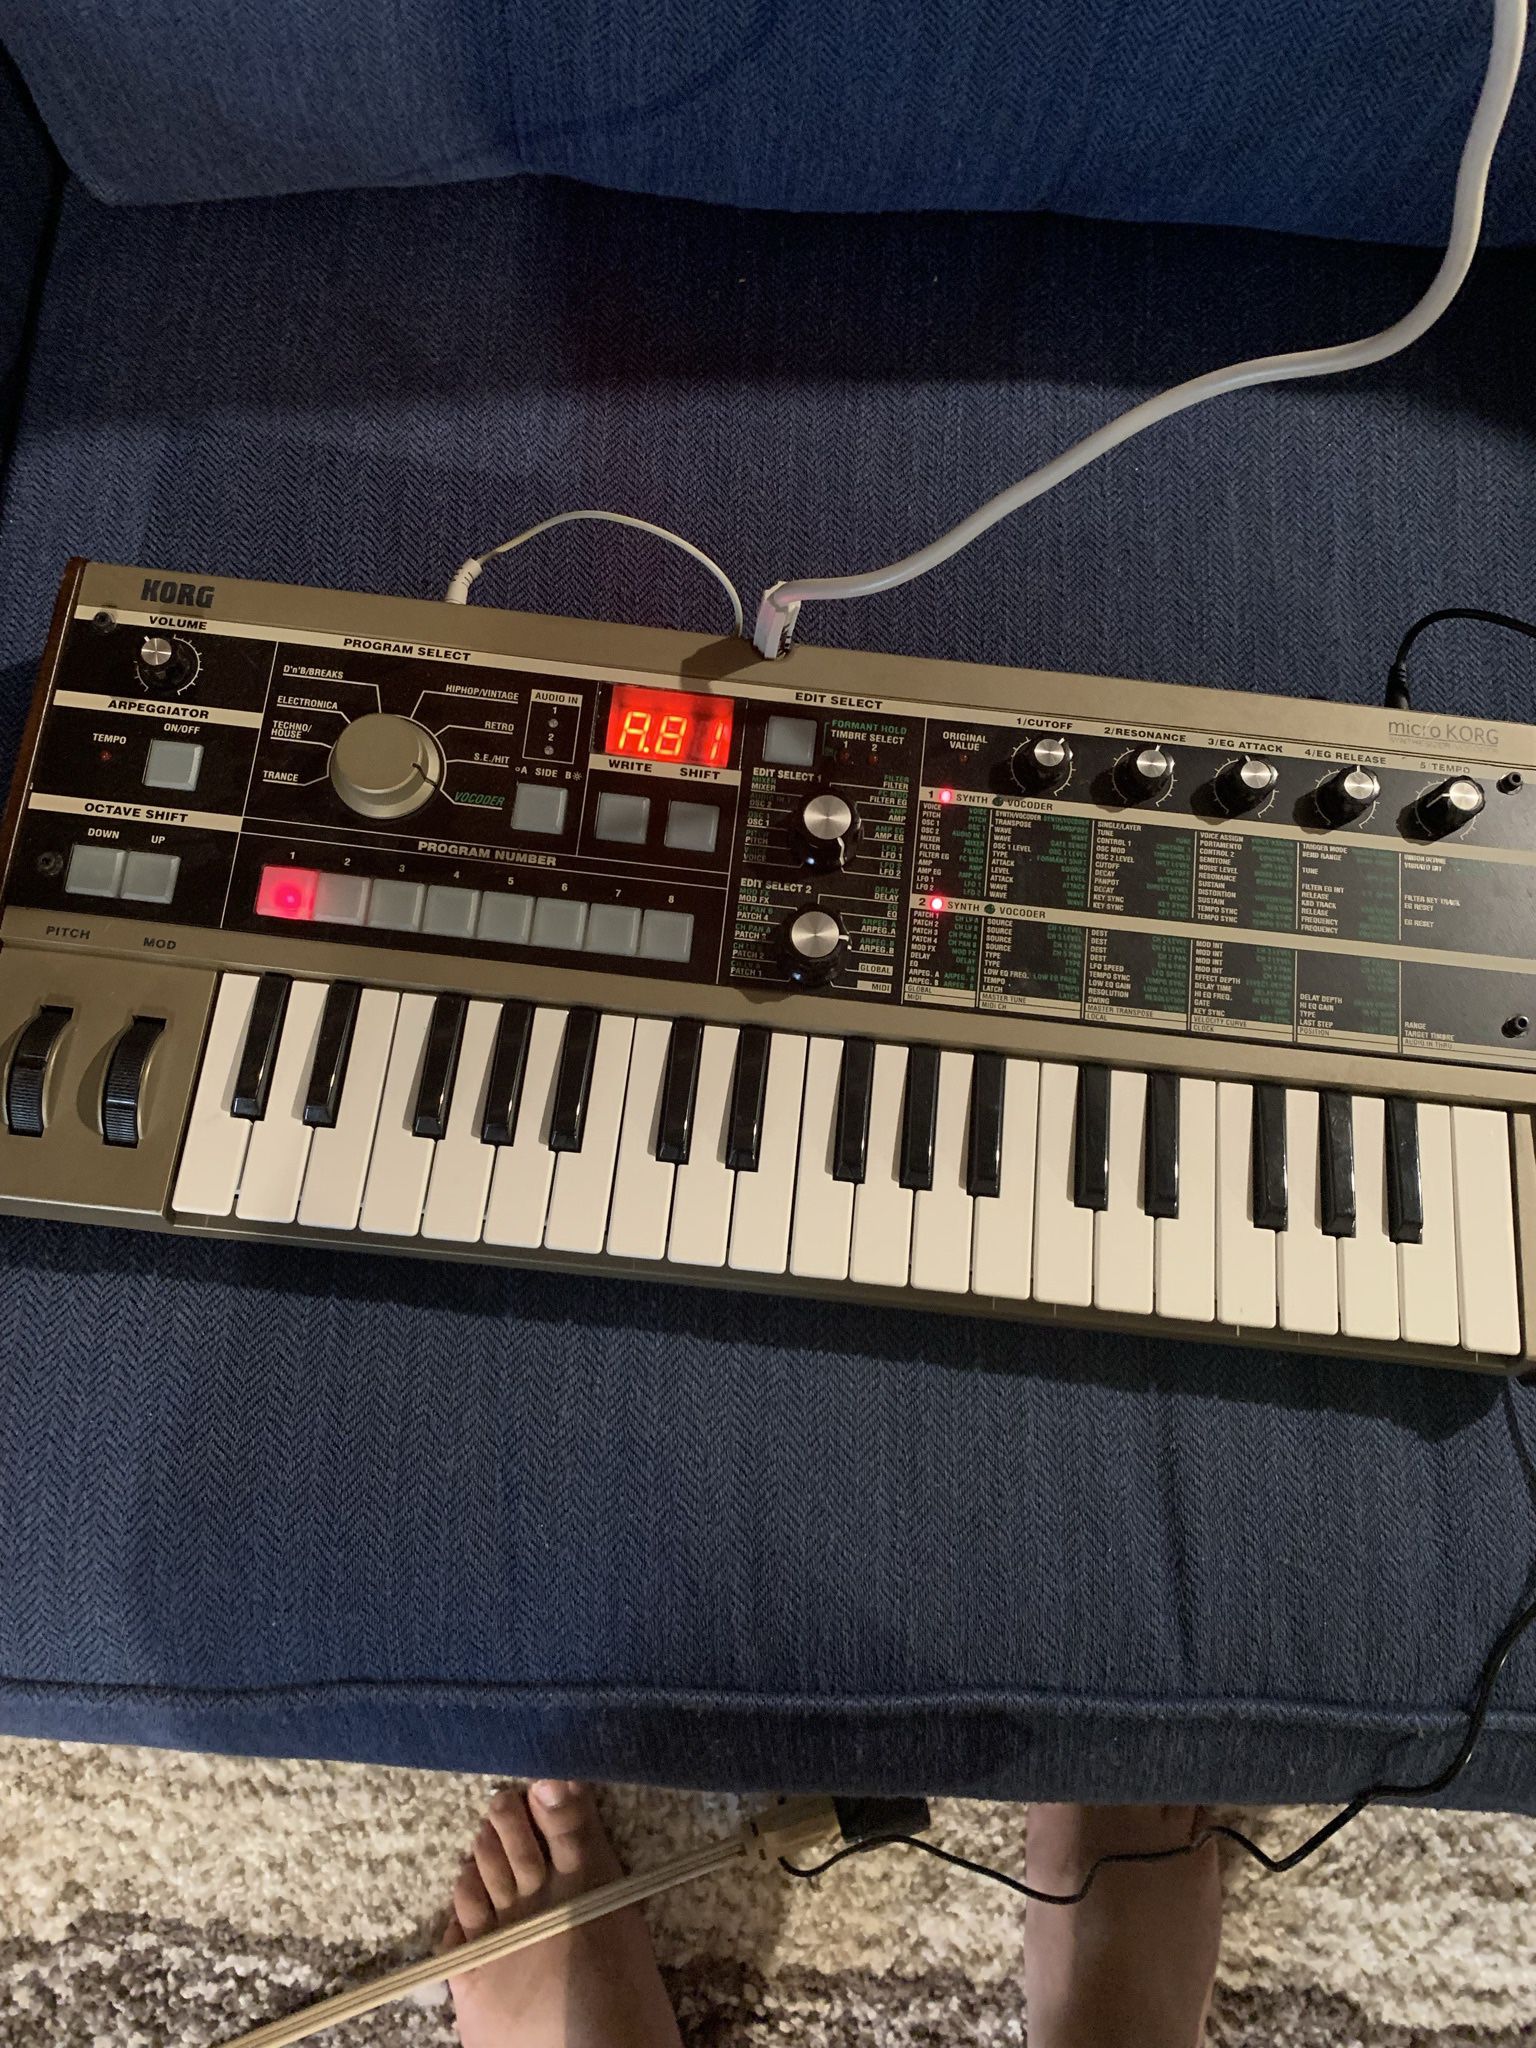 Mint Microkorg Synthesizer With vocoder